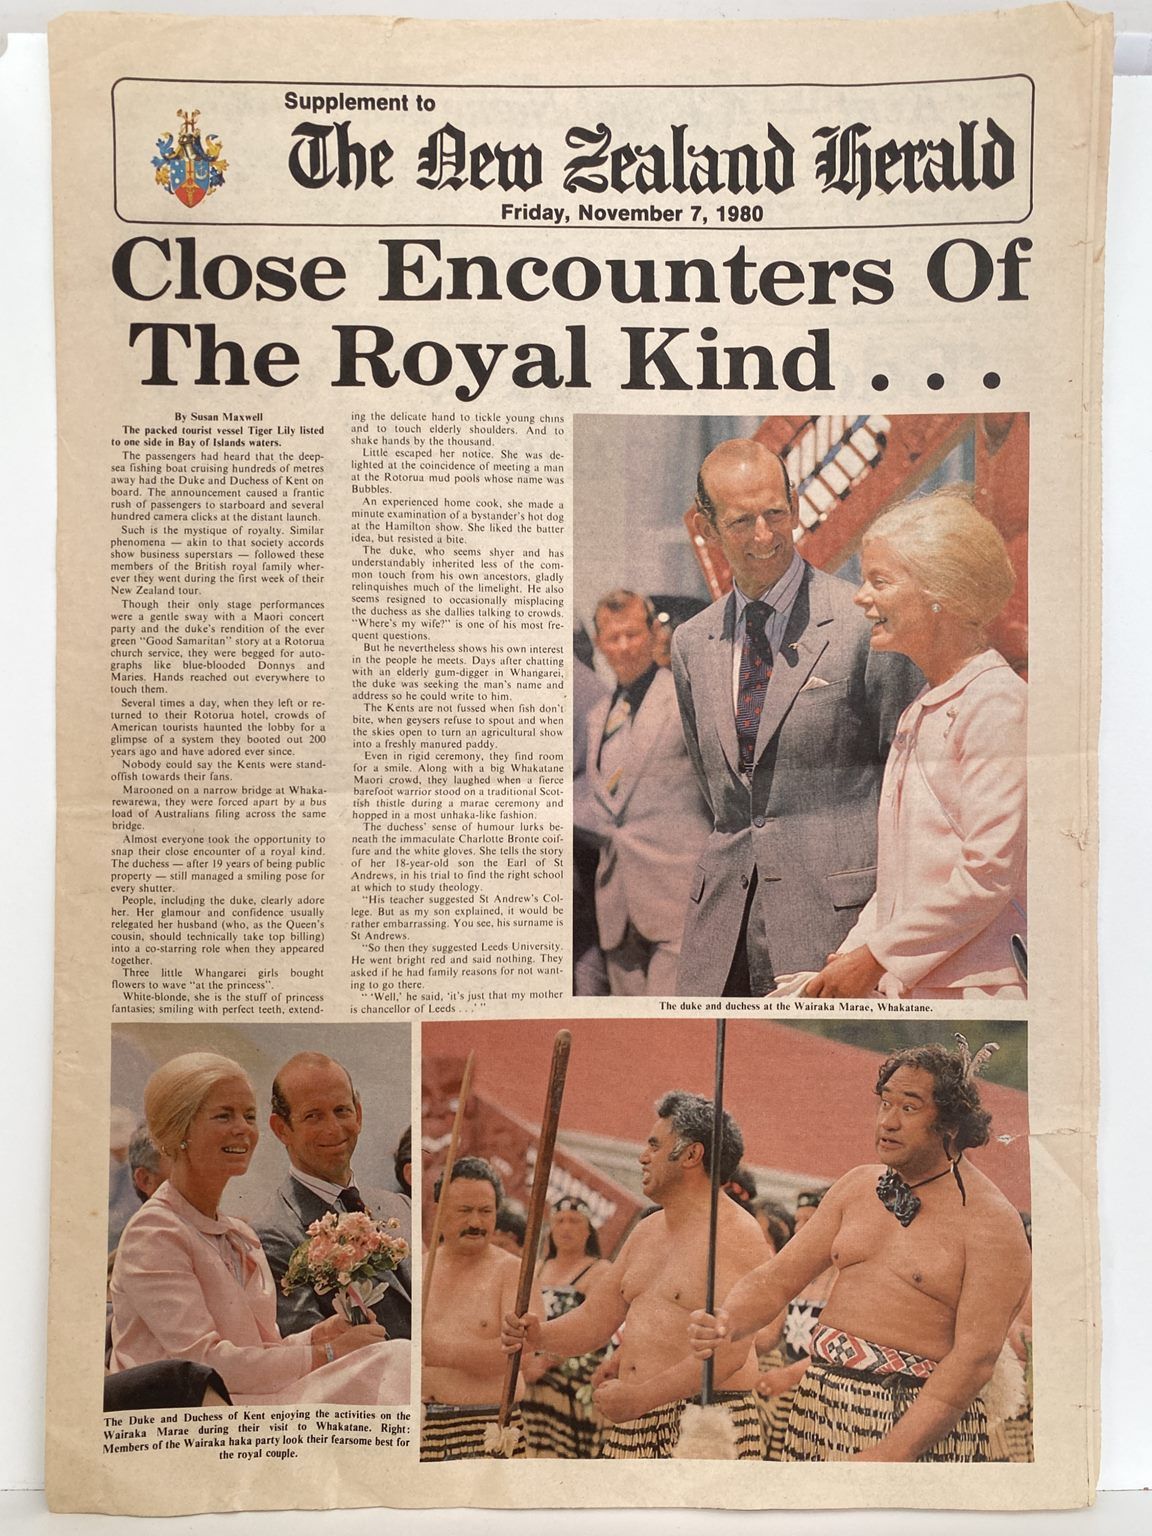 OLD NEWSPAPER: The New Zealand Herald, 7 November 1980 - Royal Tour Supplement